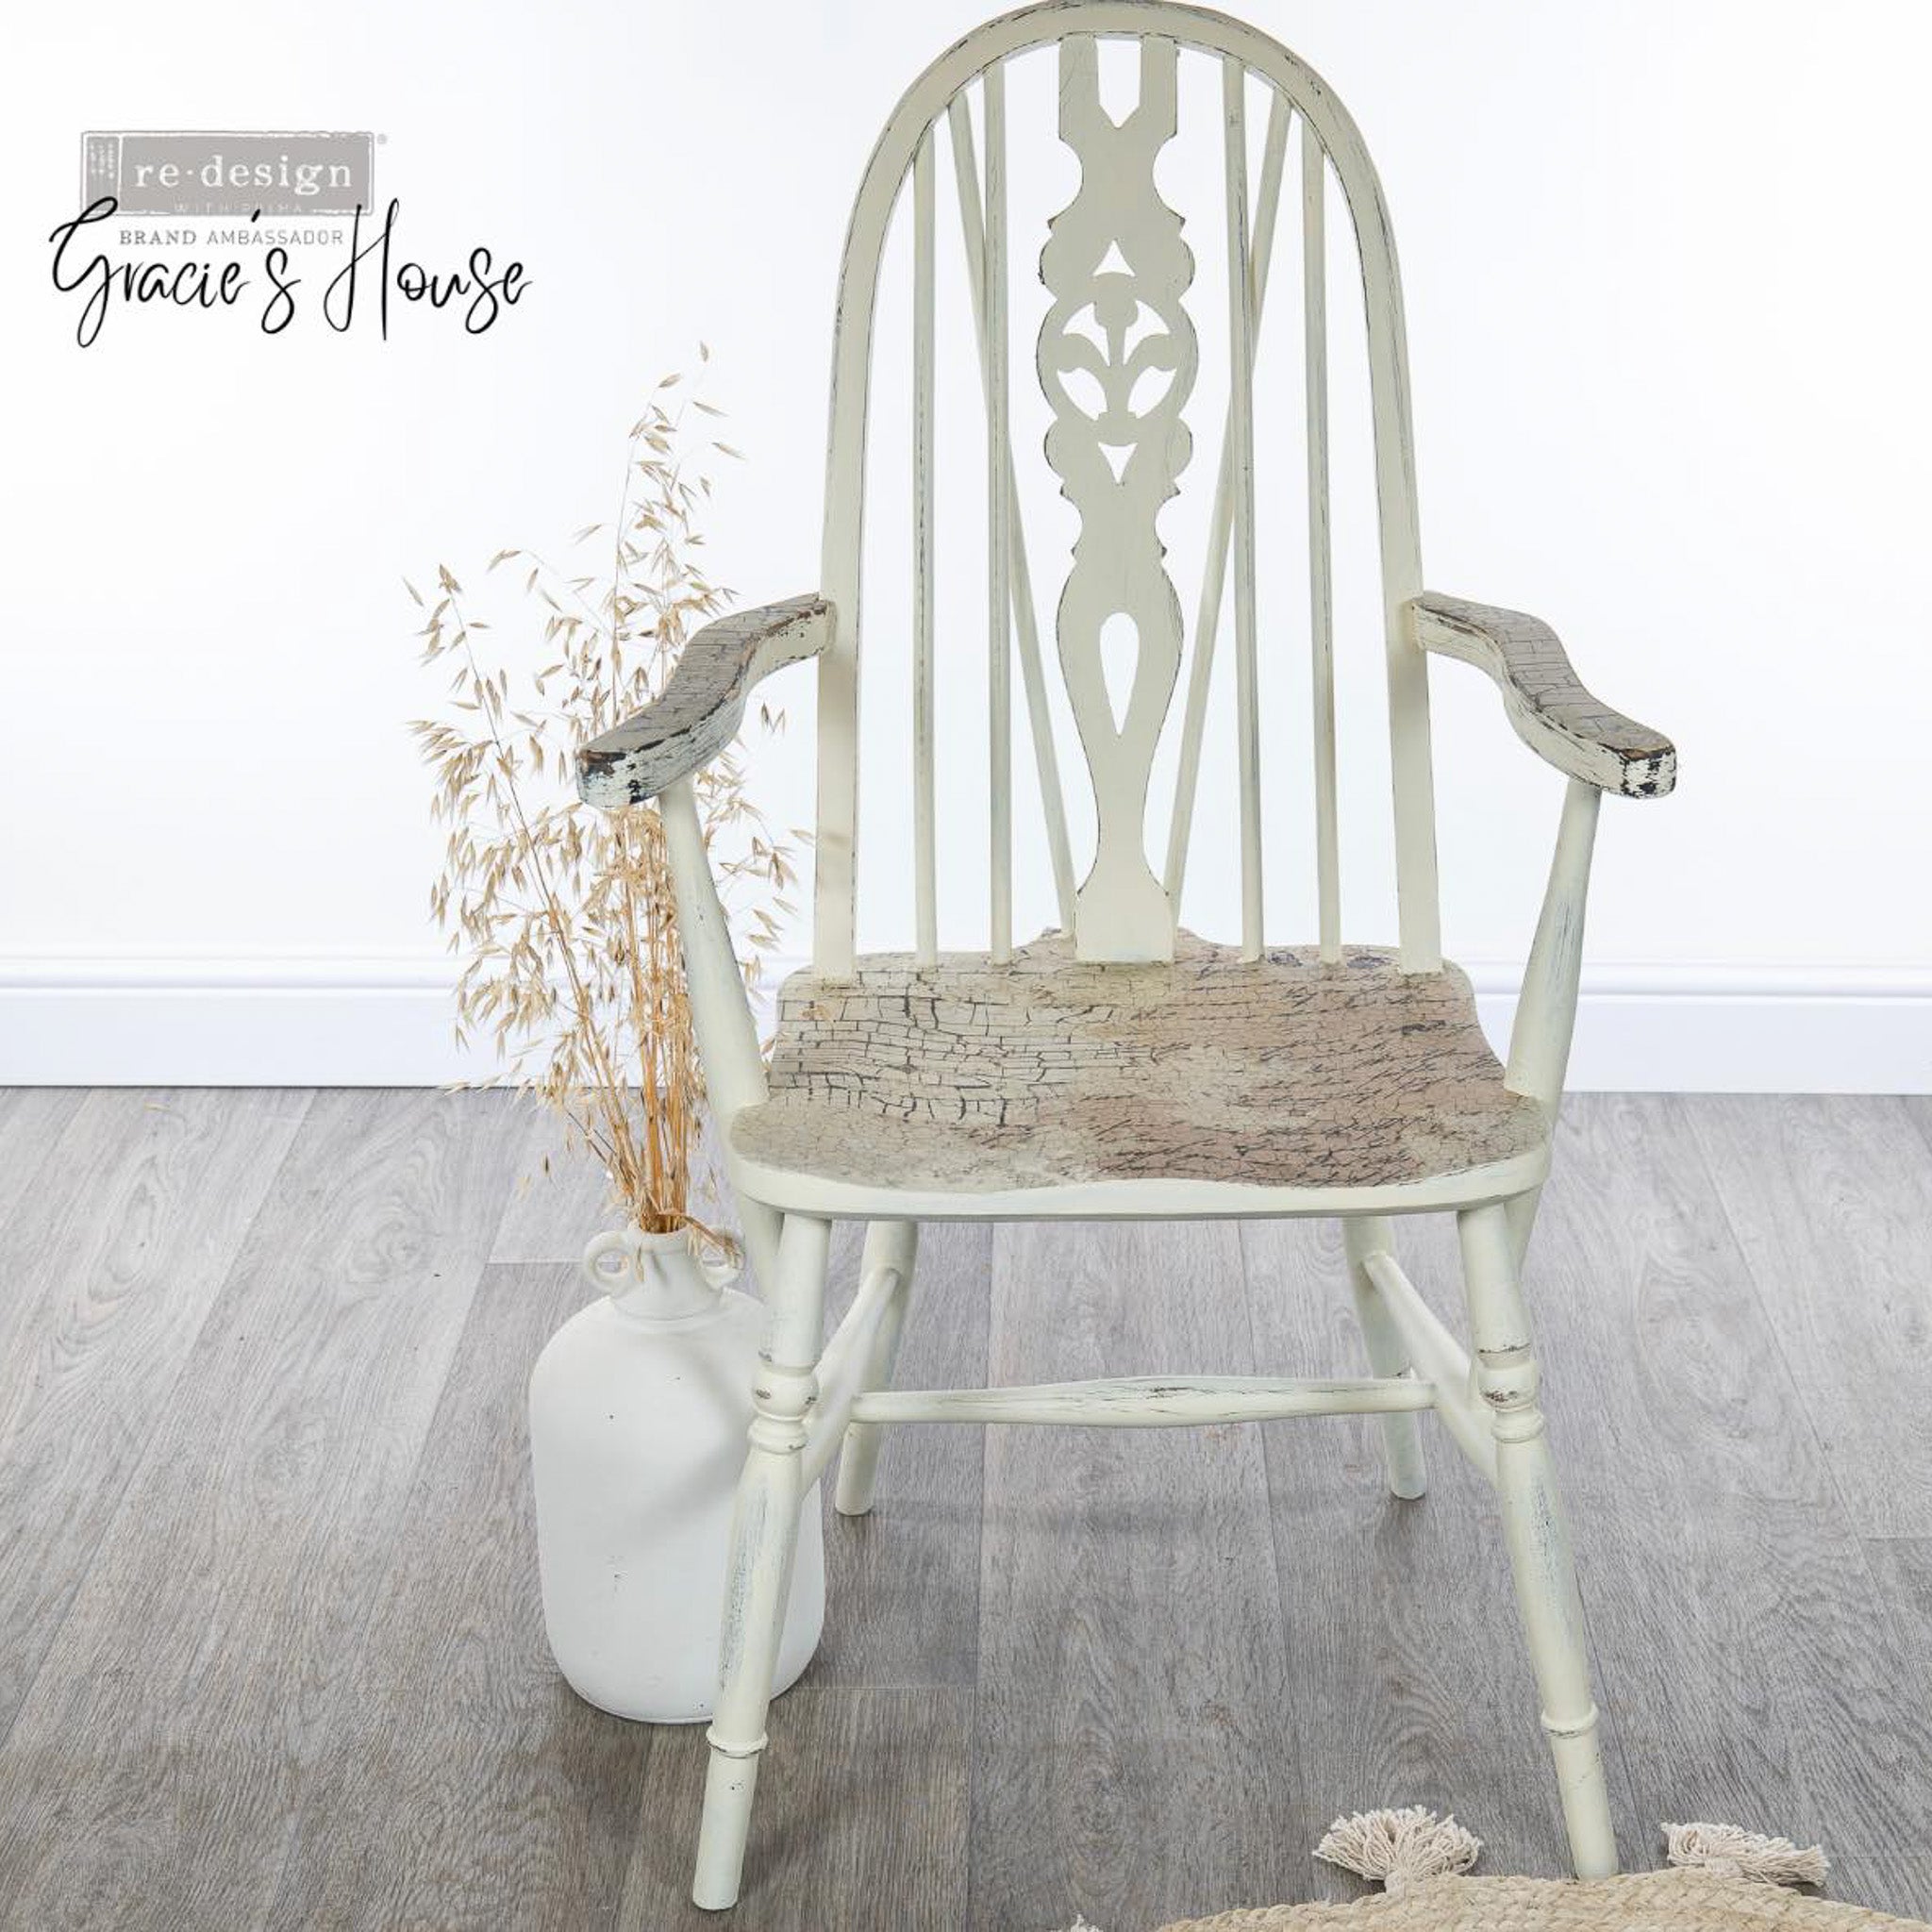 A vintage wood chair refurbished by Gracie's House is painted white and features ReDesign with Prima's La Spaccatura on the seat and arm rests.